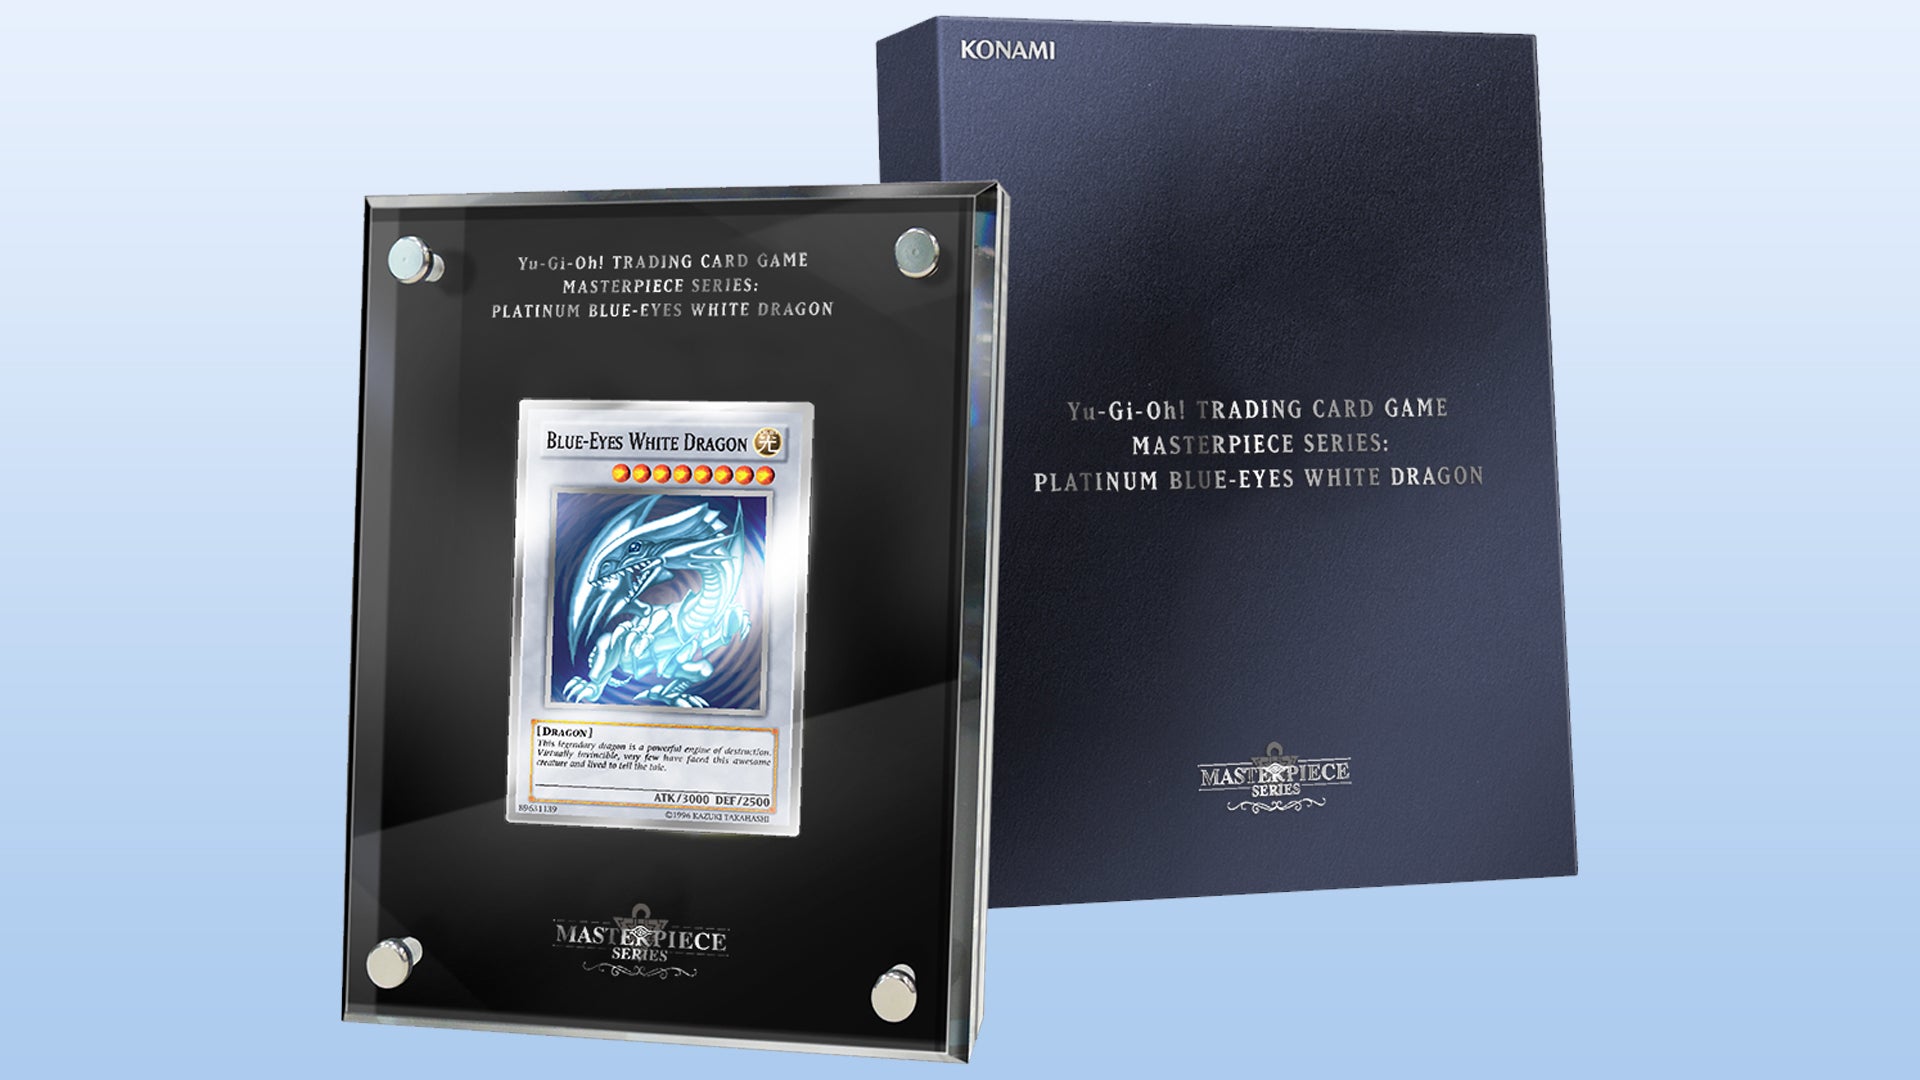 Image for Yu-Gi-Oh!’s Premium Blue-Eyes White Dragon card is made of silver, already reselling for thousands on eBay